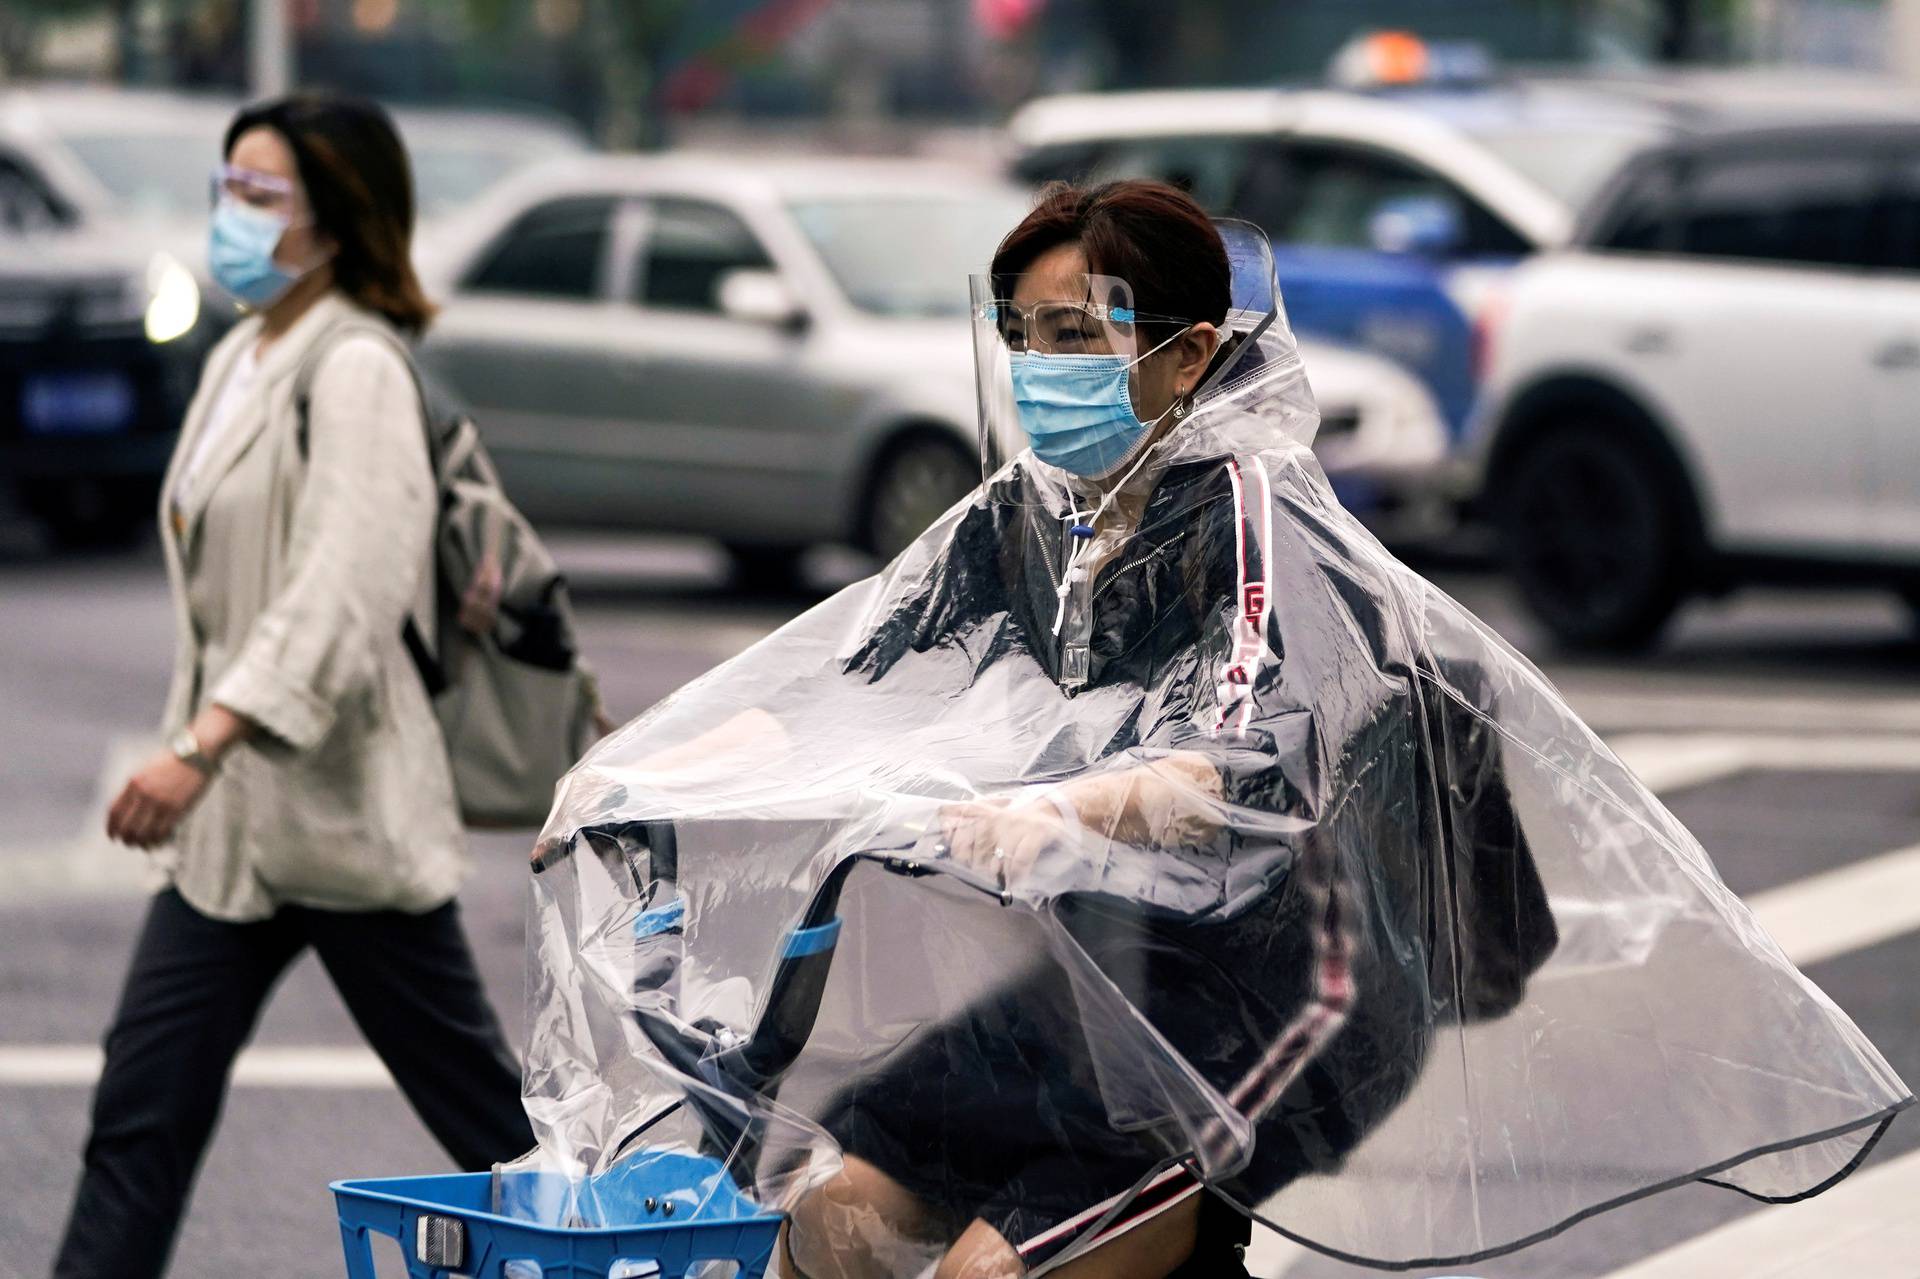 People wearing protective face masks are seen on a street in Wuhan